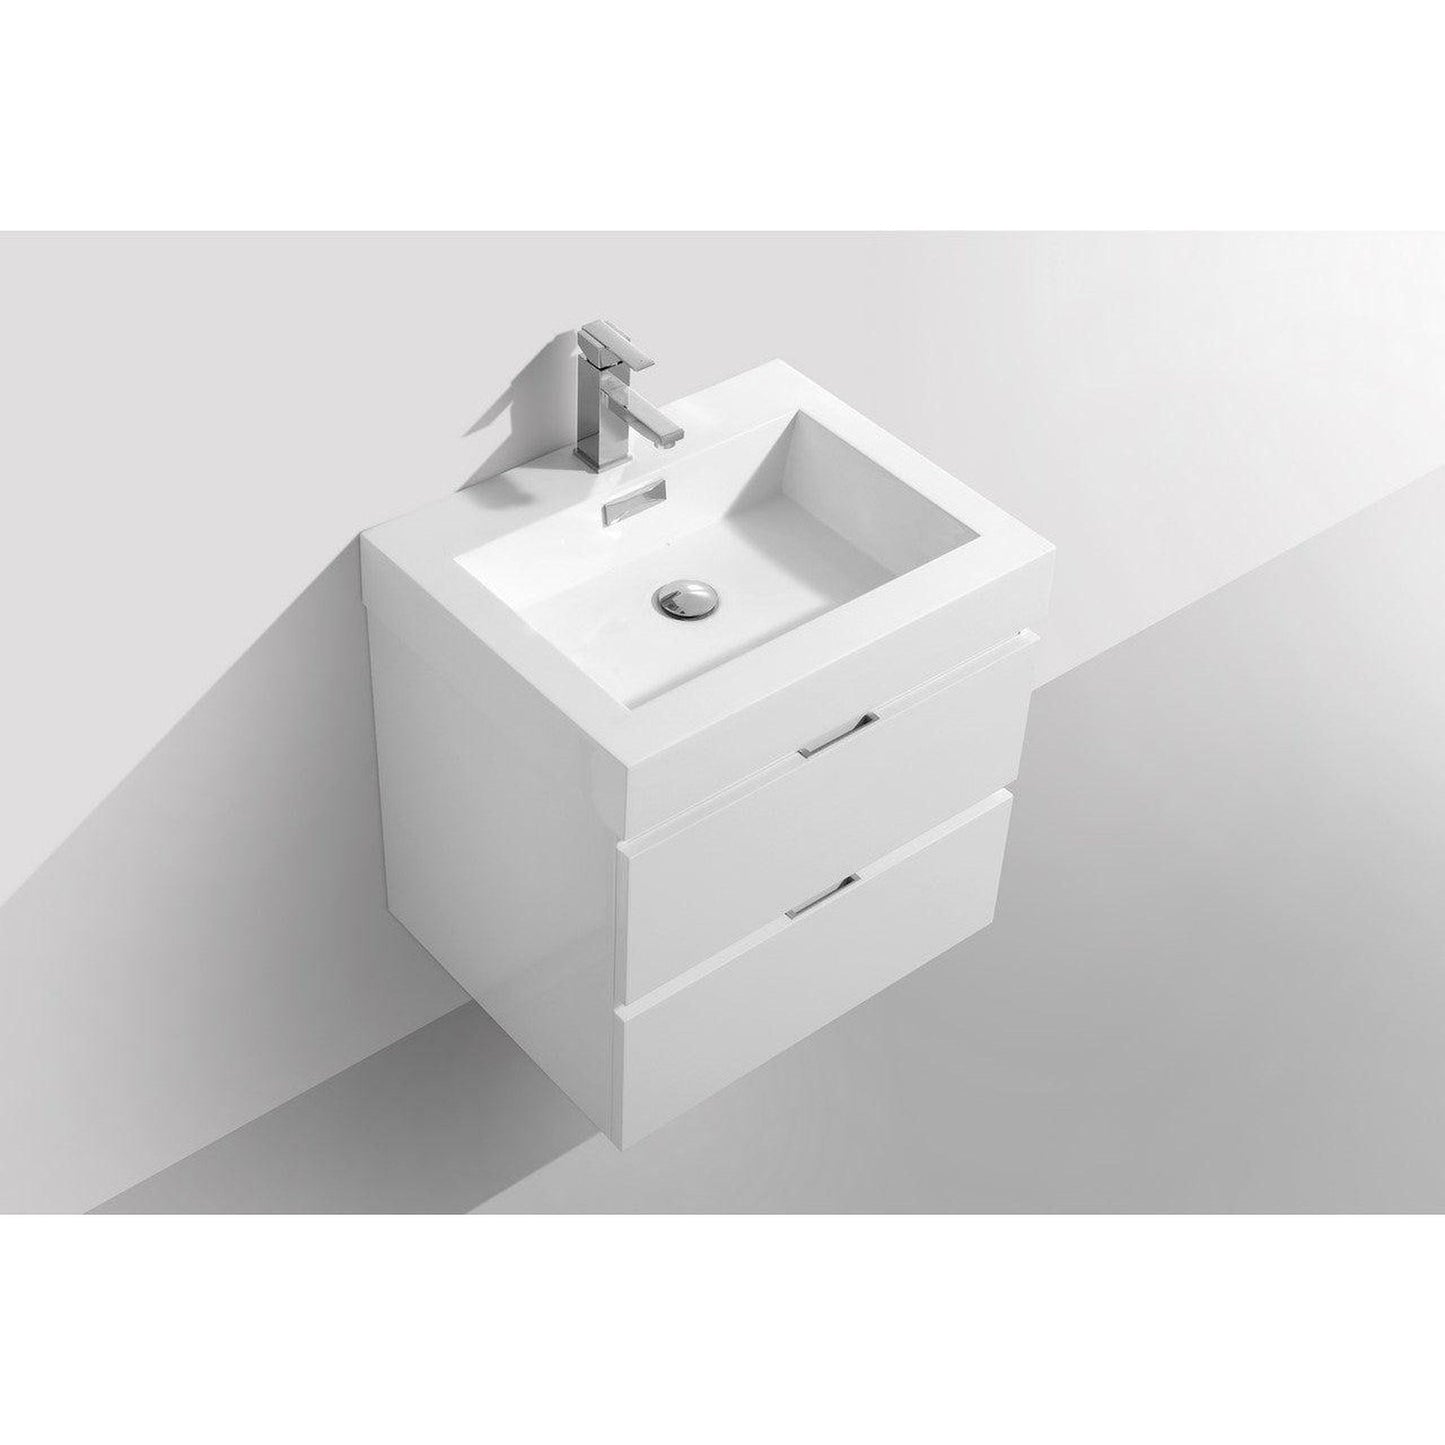 KubeBath Bliss 24" High Gloss White Wall-Mounted Modern Bathroom Vanity With Single Integrated Acrylic Sink With Overflow